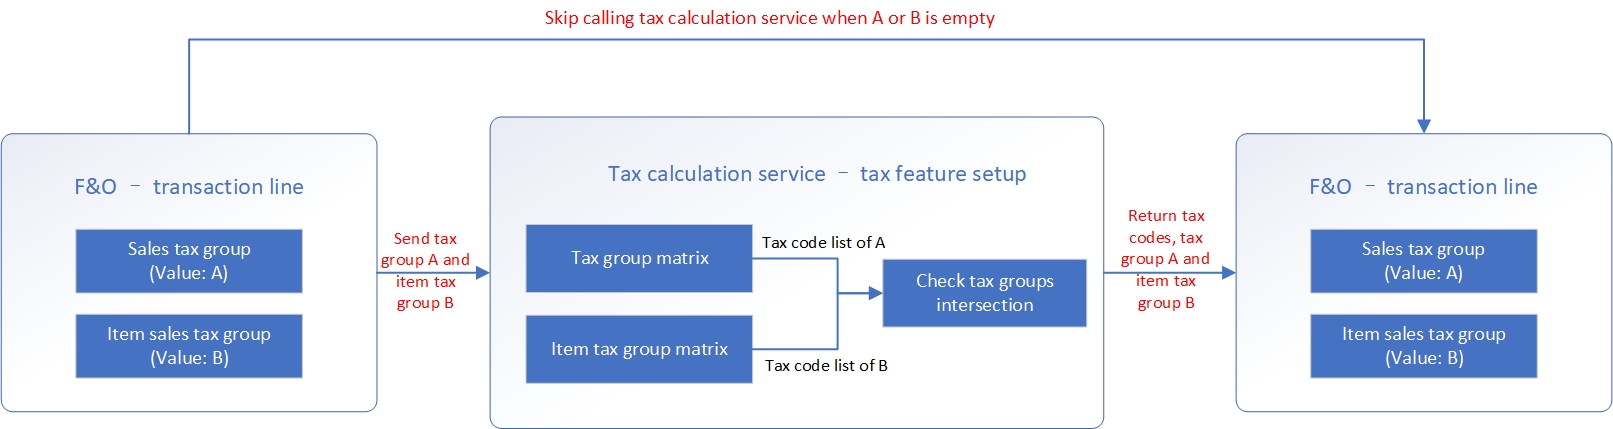 Screenshot of the flow that combines tax code determination logic with override sales tax yes.